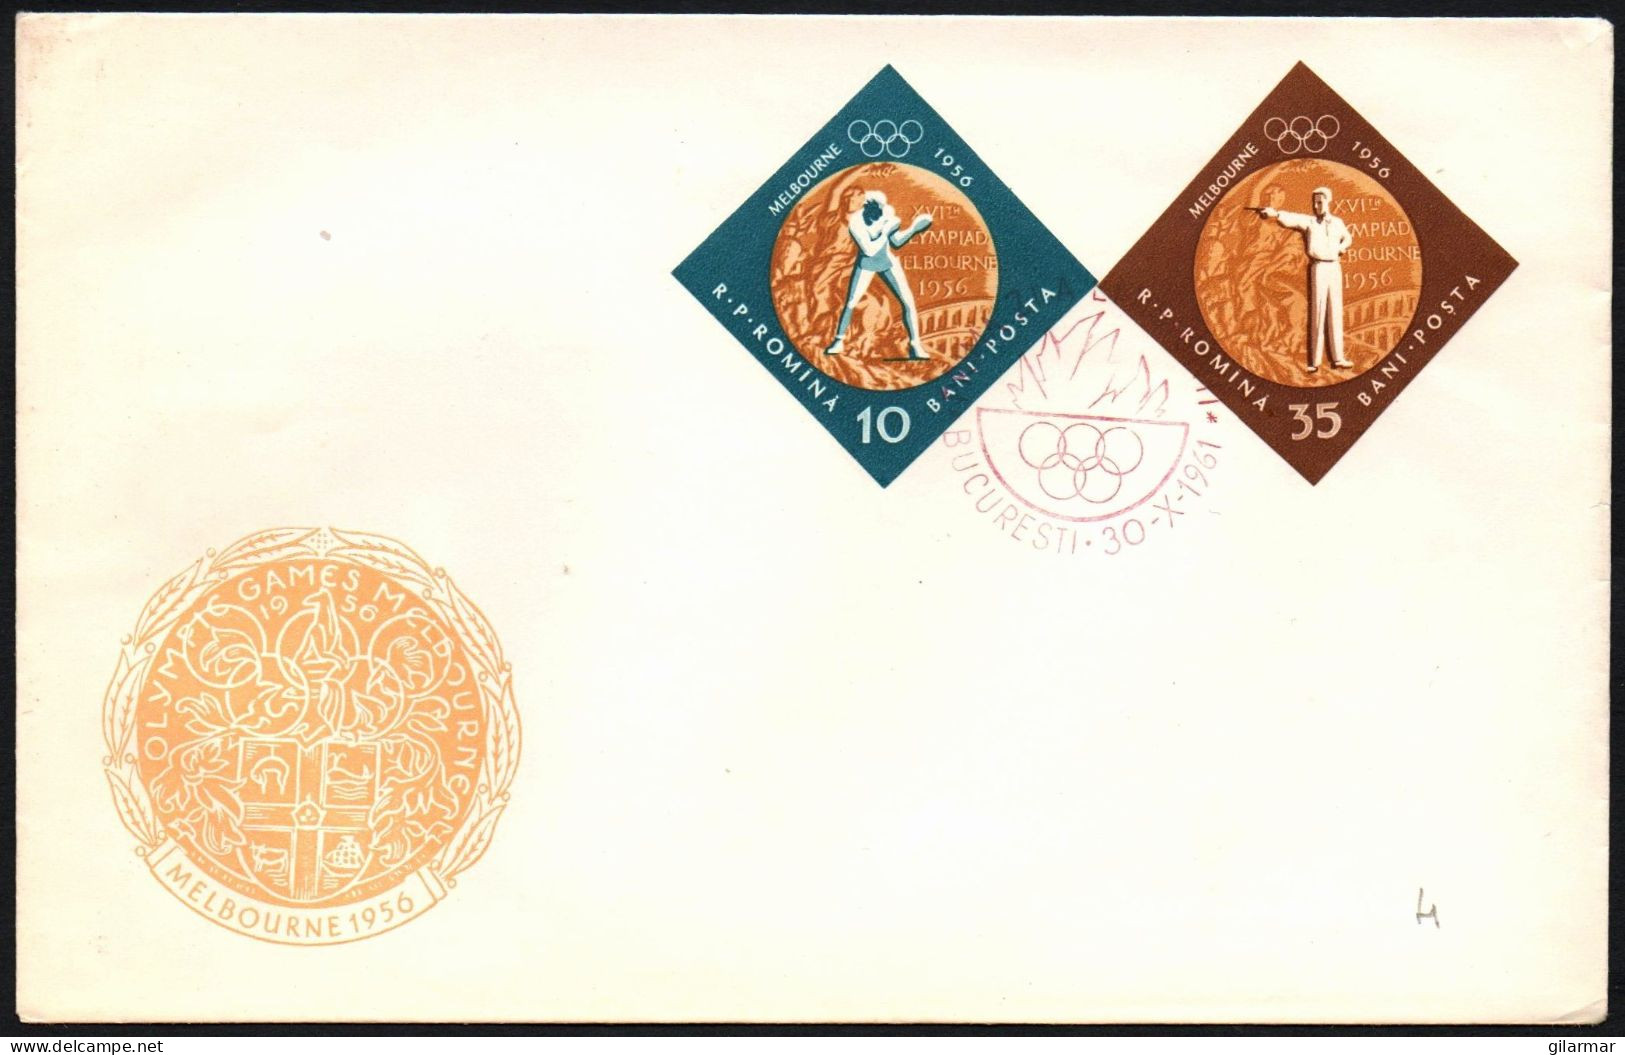 ROMANIA BUCHAREST 1961 - GOLD MEDALS AT THE OLYMPIC GAMES OF MELBOURNE '56 - FDC - BOXING / SHOOTING IMPERFORATED - G - Verano 1956: Melbourne